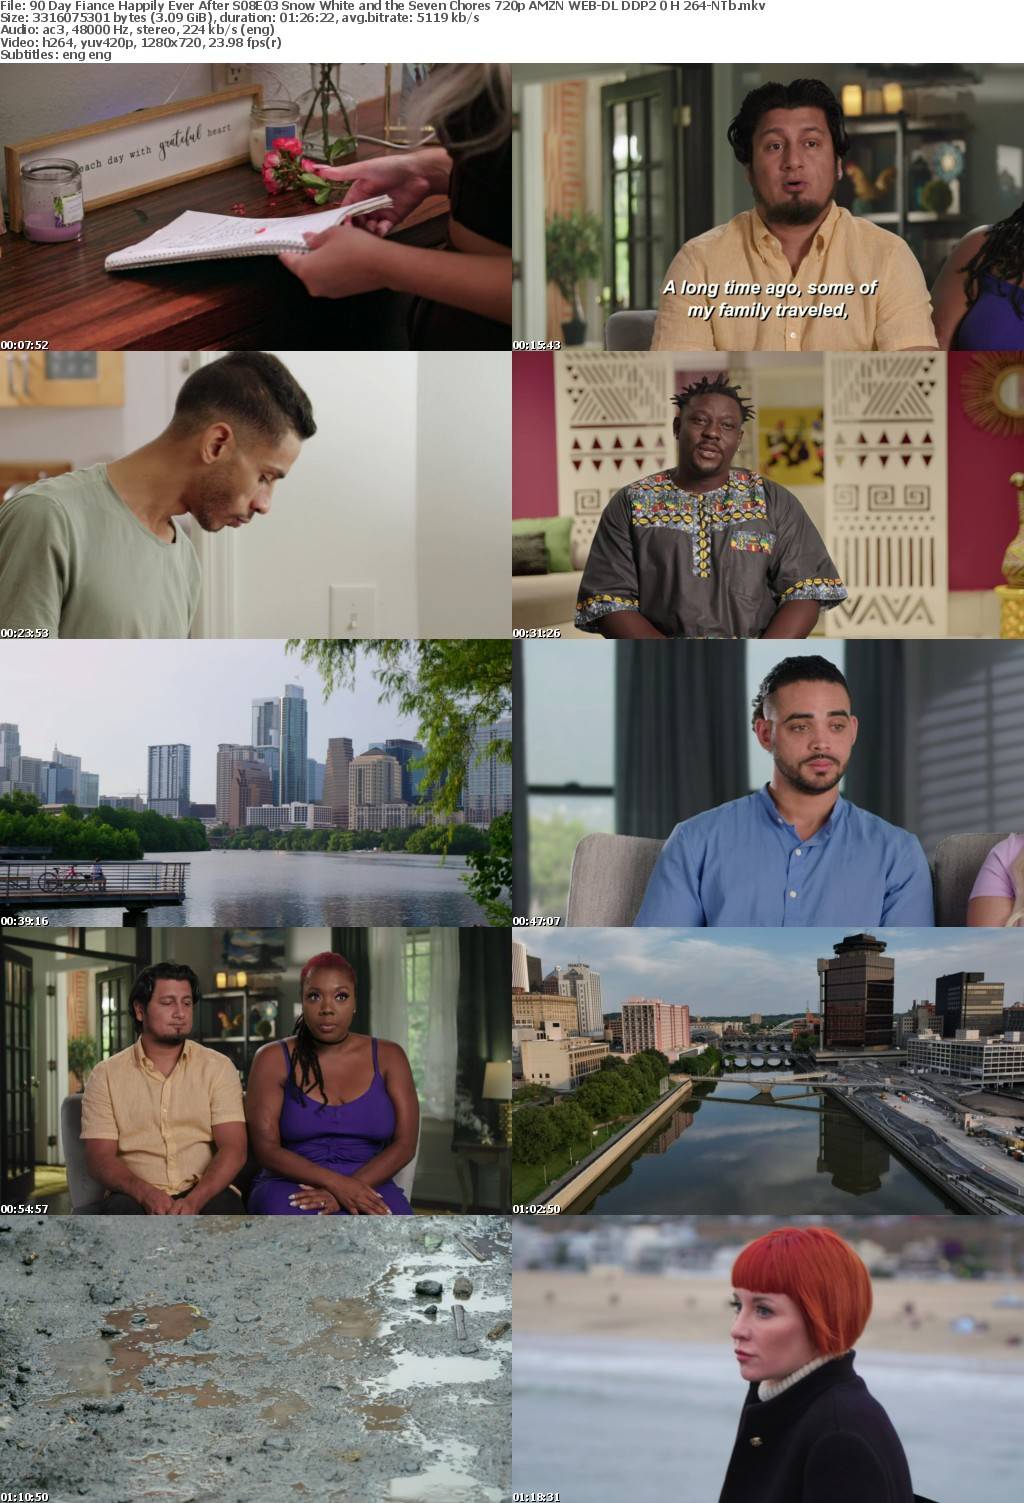 90 Day Fiance Happily Ever After S08E03 Snow White and the Seven Chores 720p AMZN WEB-DL DDP2 0 H 264-NTb